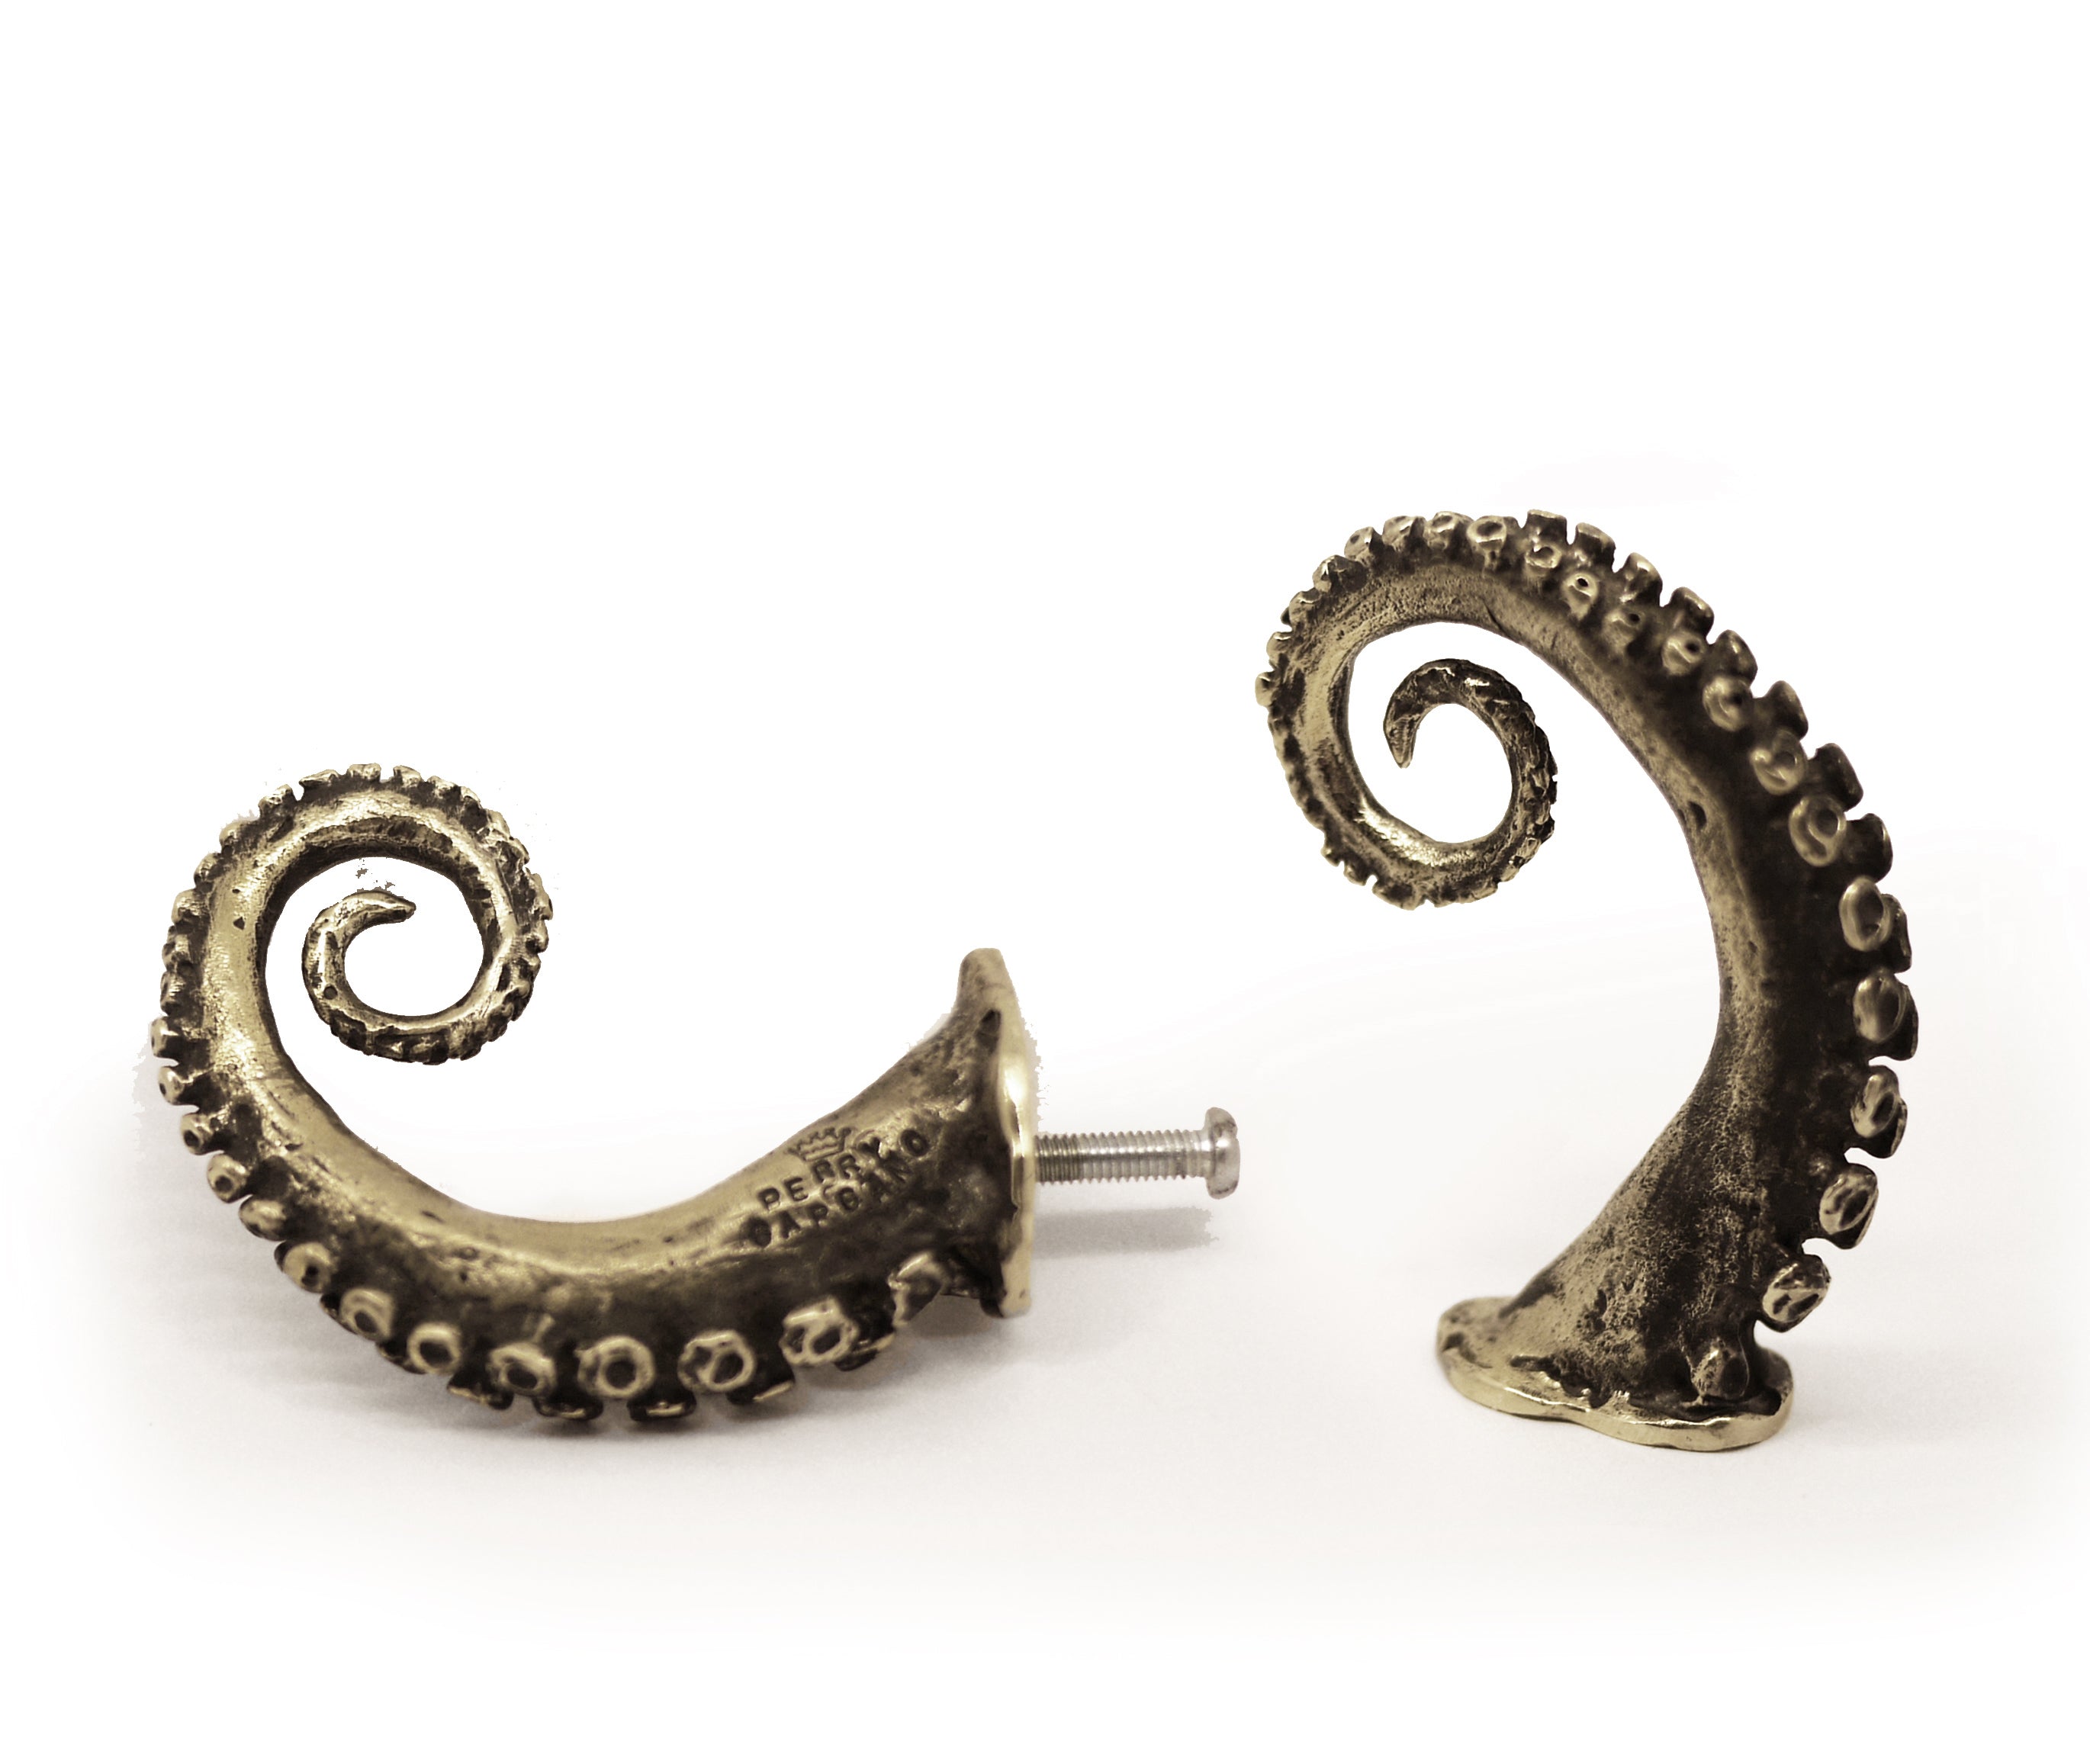 Nautical Knobs and Hooks | Perry Gargano | Handtuch-Sets